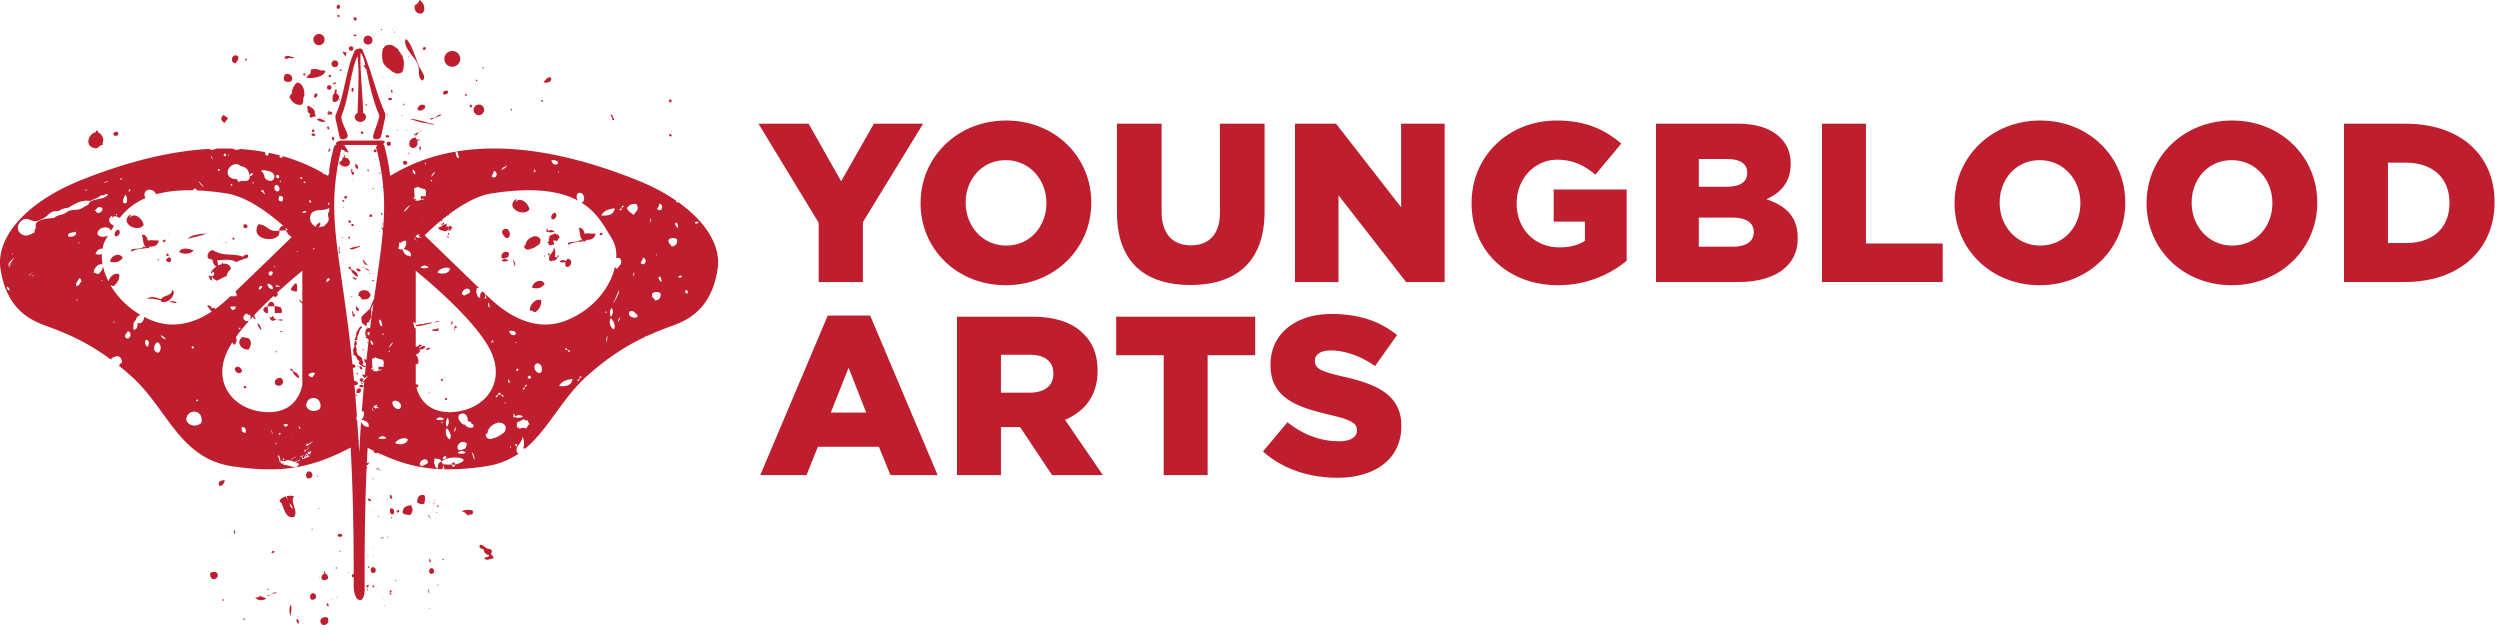 Youngblood Arts